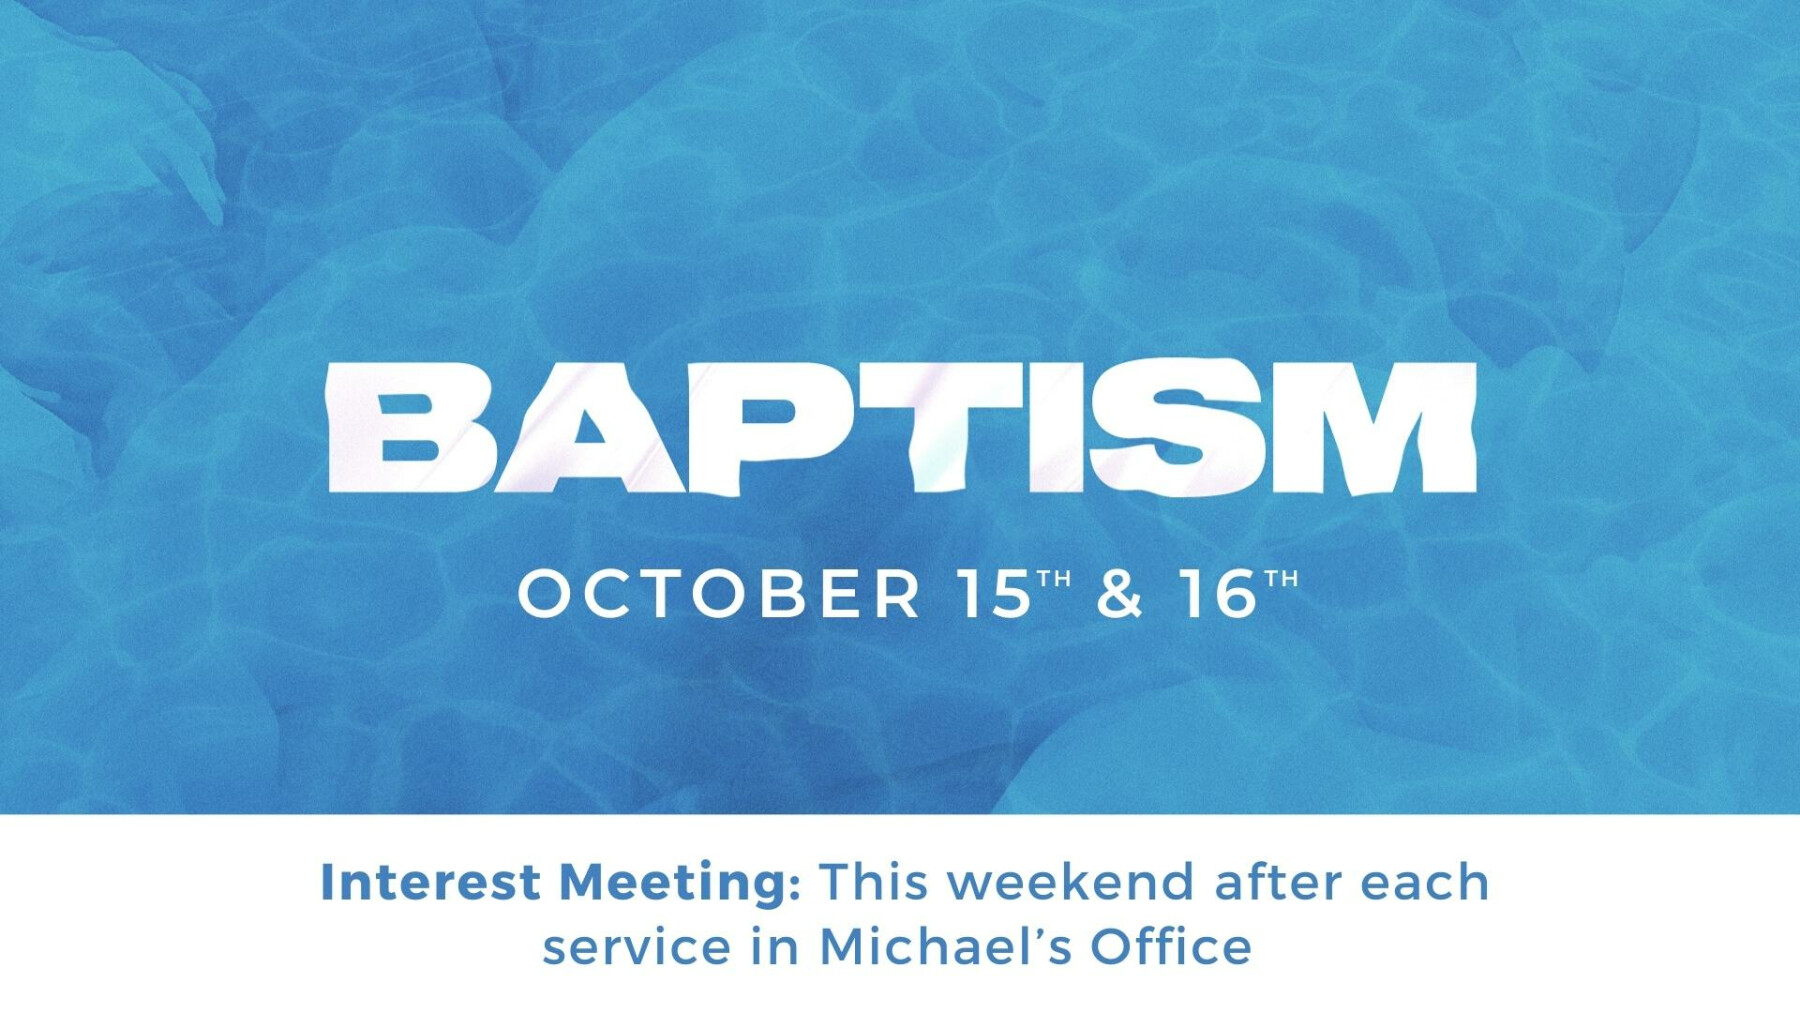 Baptism Weekend - October 15th & 16th